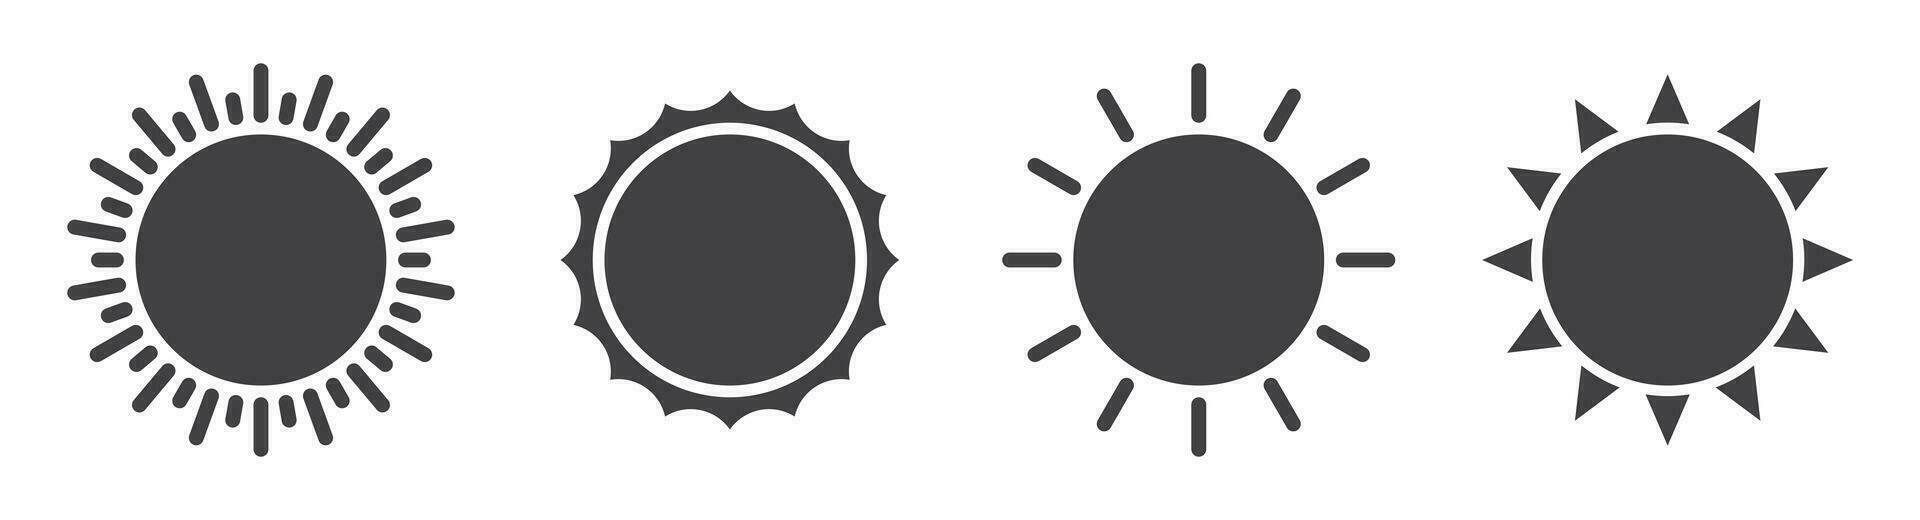 Sun icon collection vector illustration isolated on white